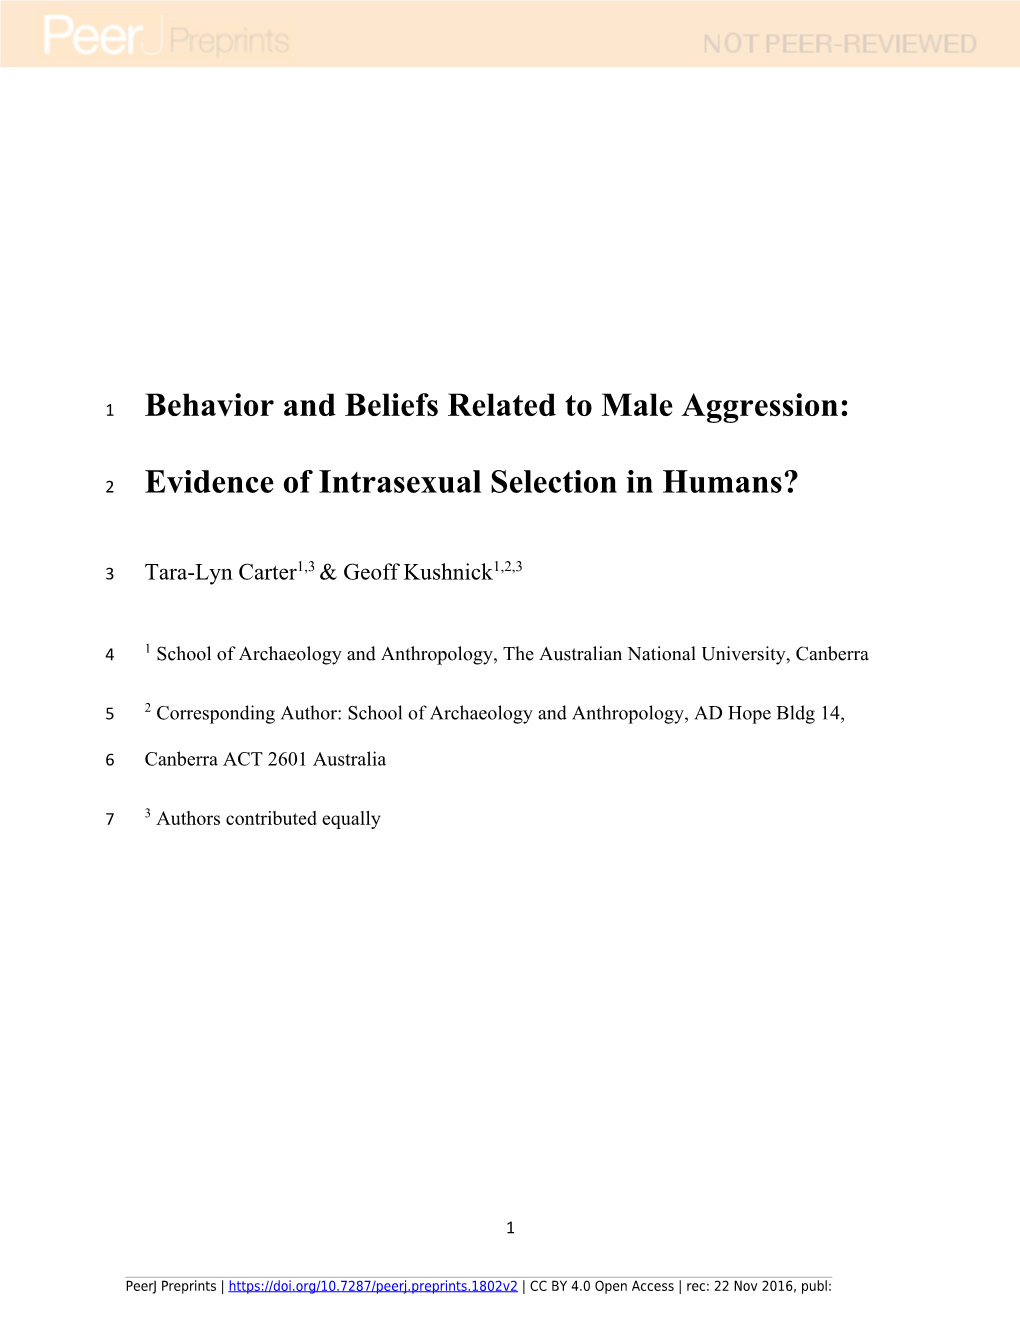 Behaviour and Beliefs Related to Male Aggression